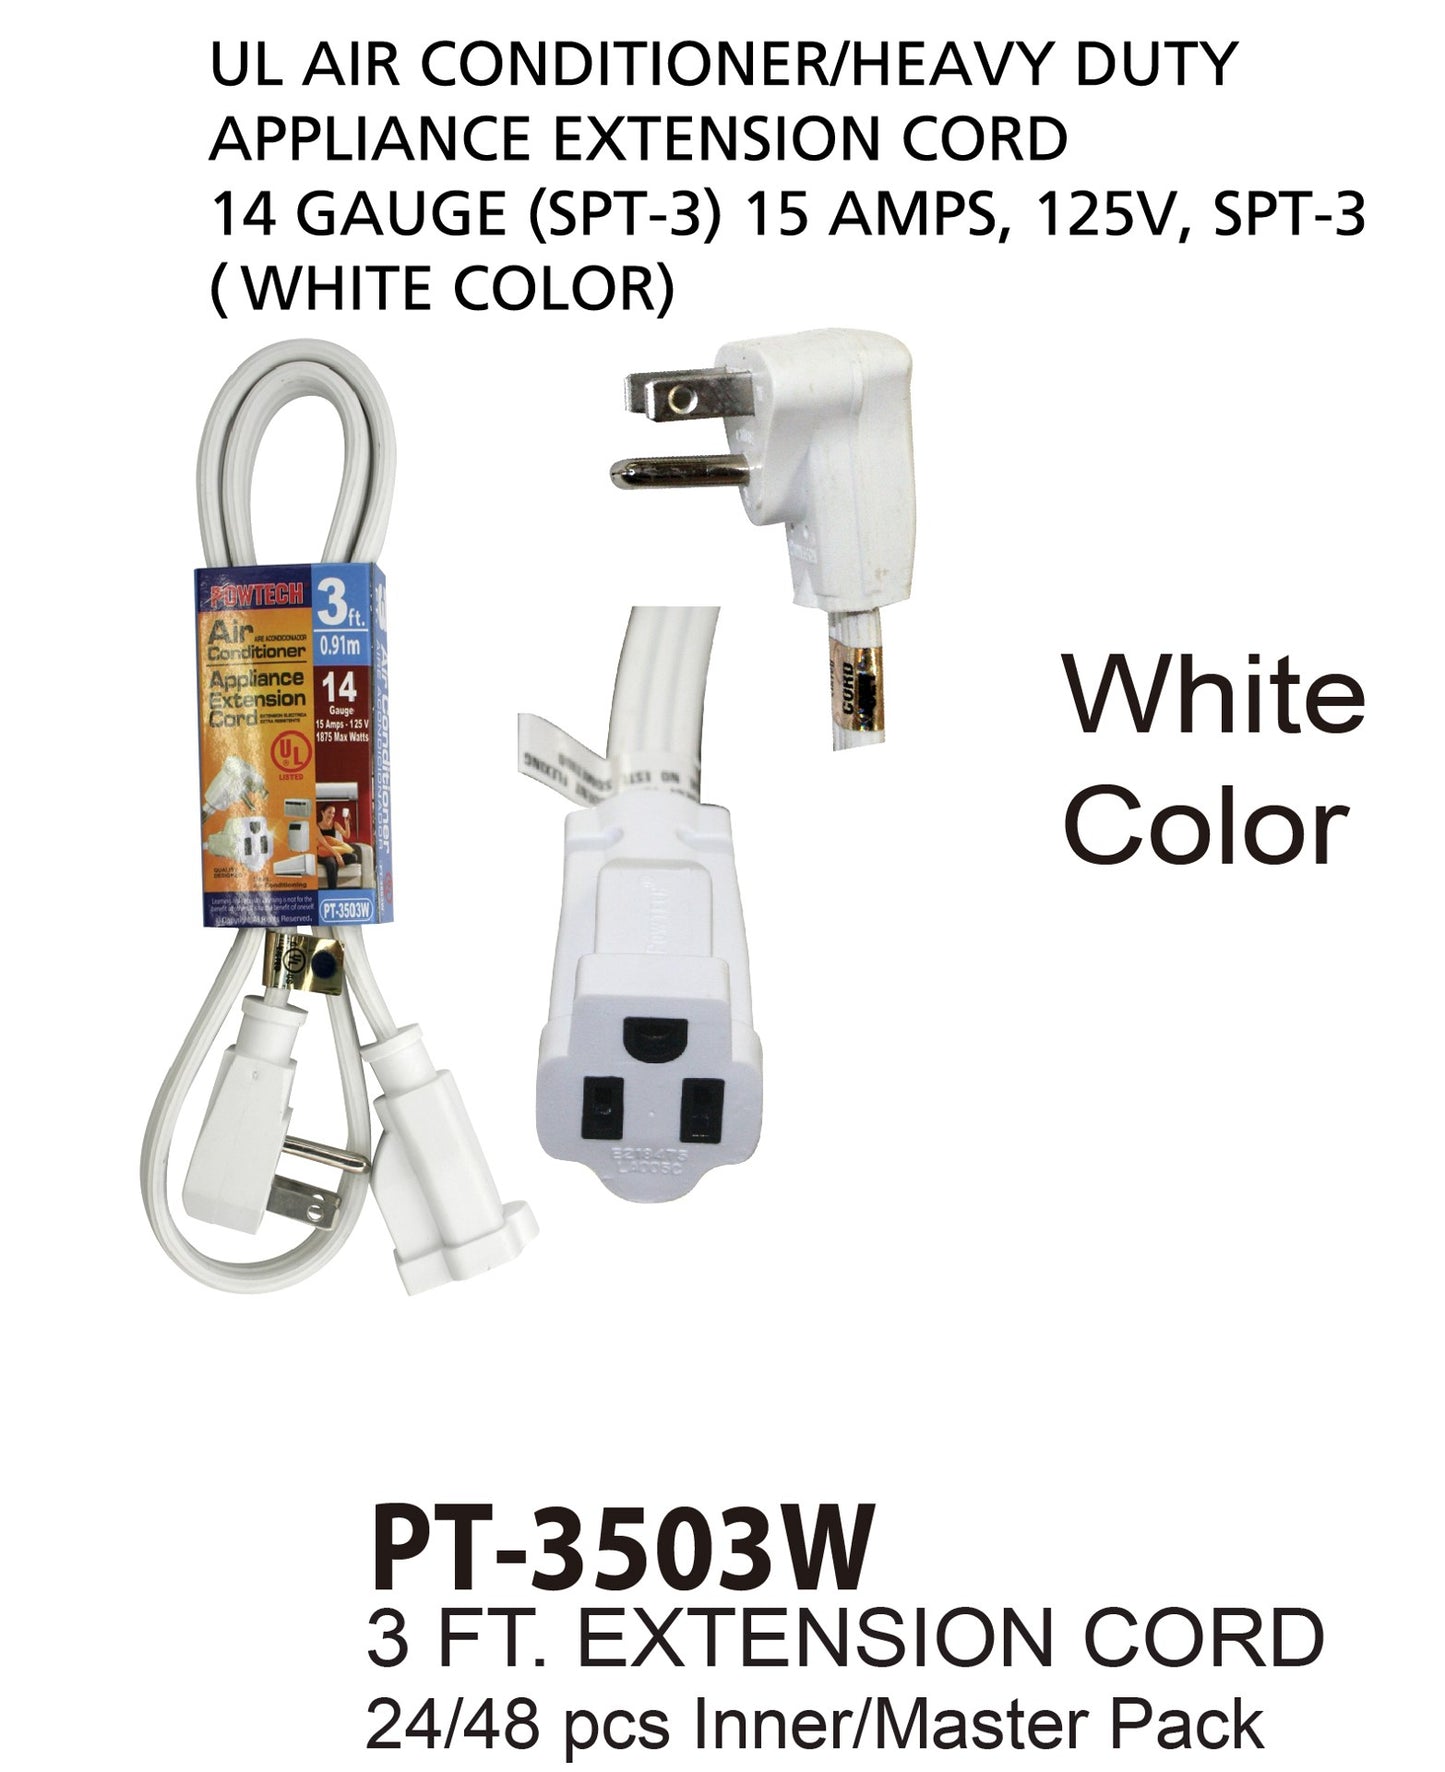 POWTECH Heavy duty 3 FT Air Conditioner Major Appliance Extension Cord UL Listed 14 Gauge, 125V, 15 Amps, 1875 Watts